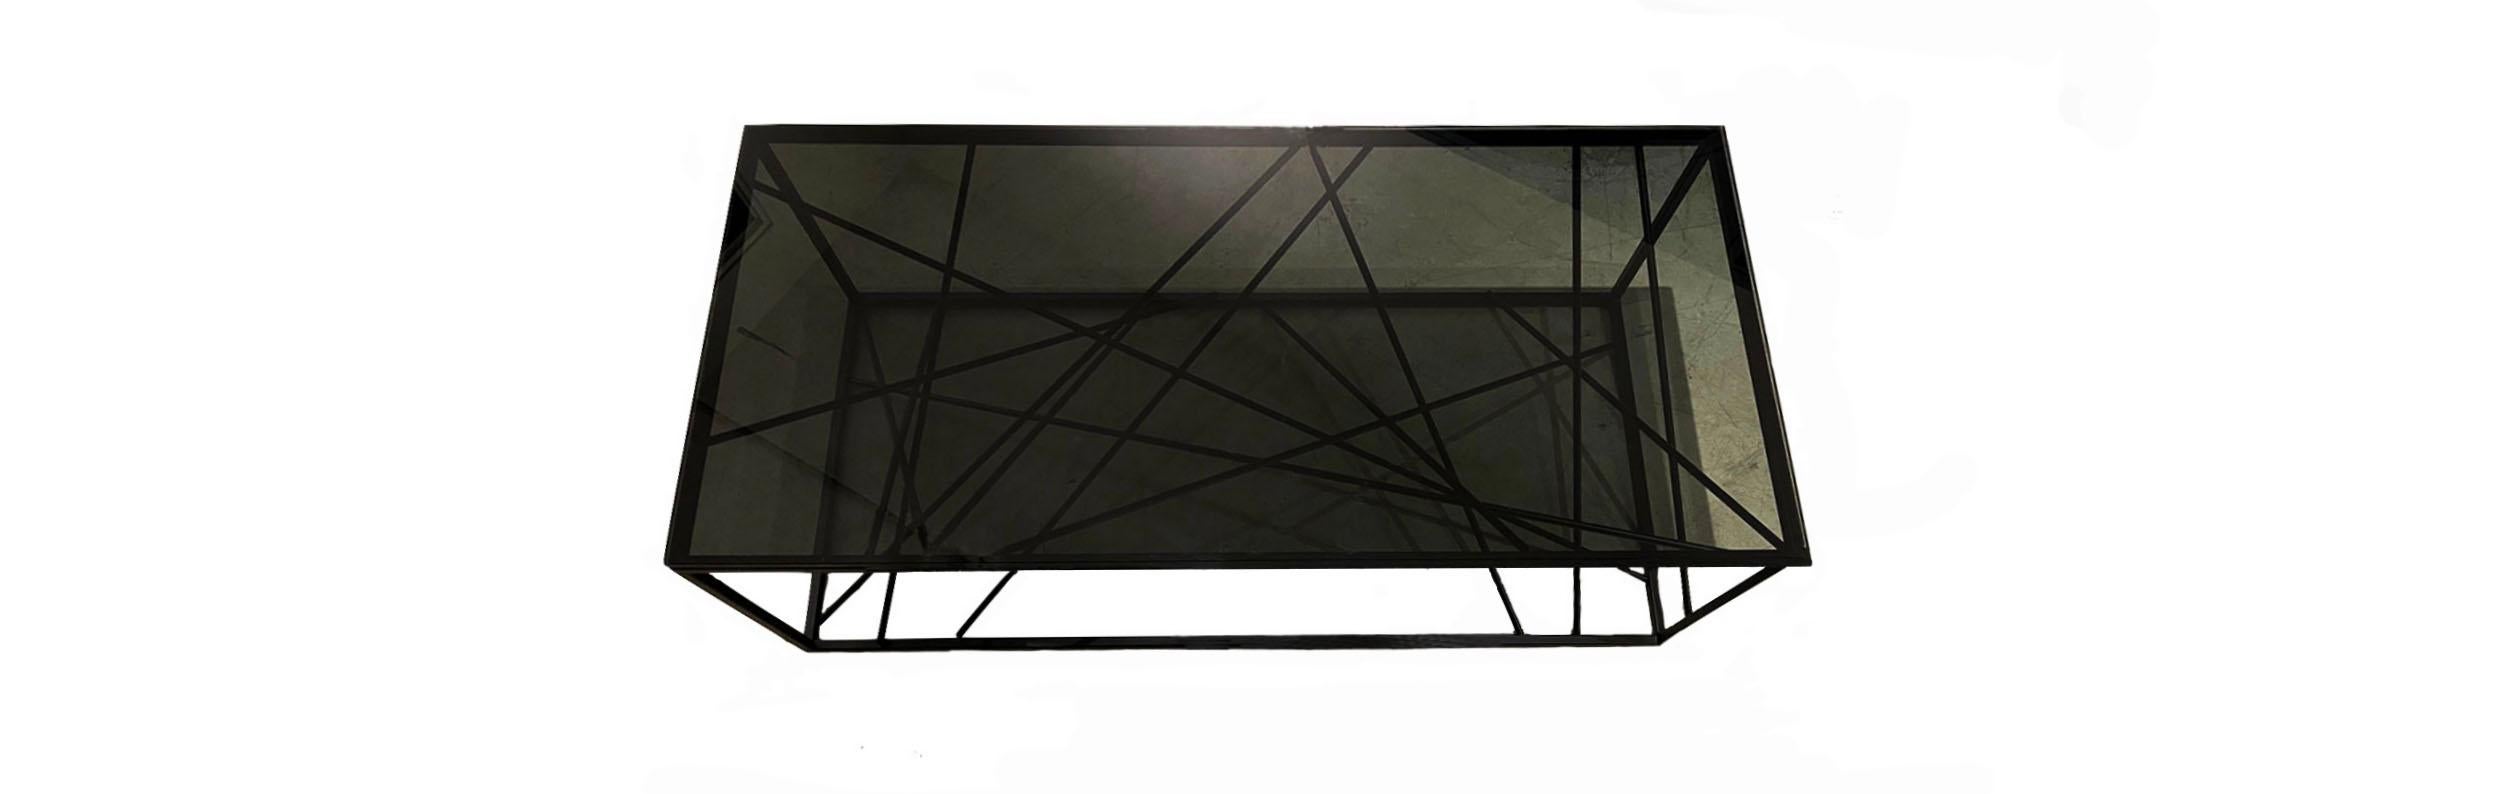 Modern Nest Coffee Table by Morgan Clayhall, sculptural, steel, glass For Sale